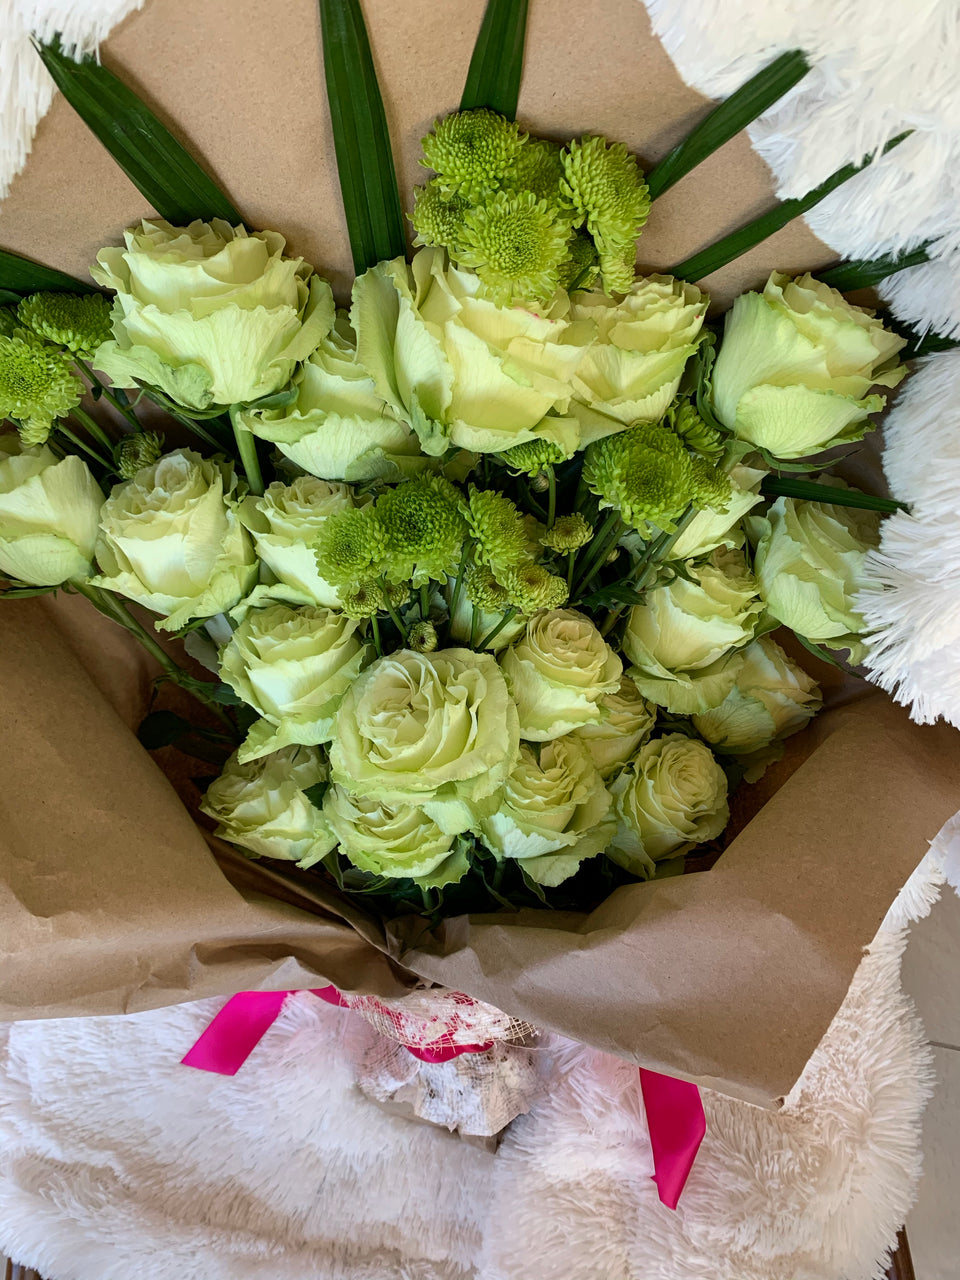 bundle of green roses and leaves wrapped in brown paper